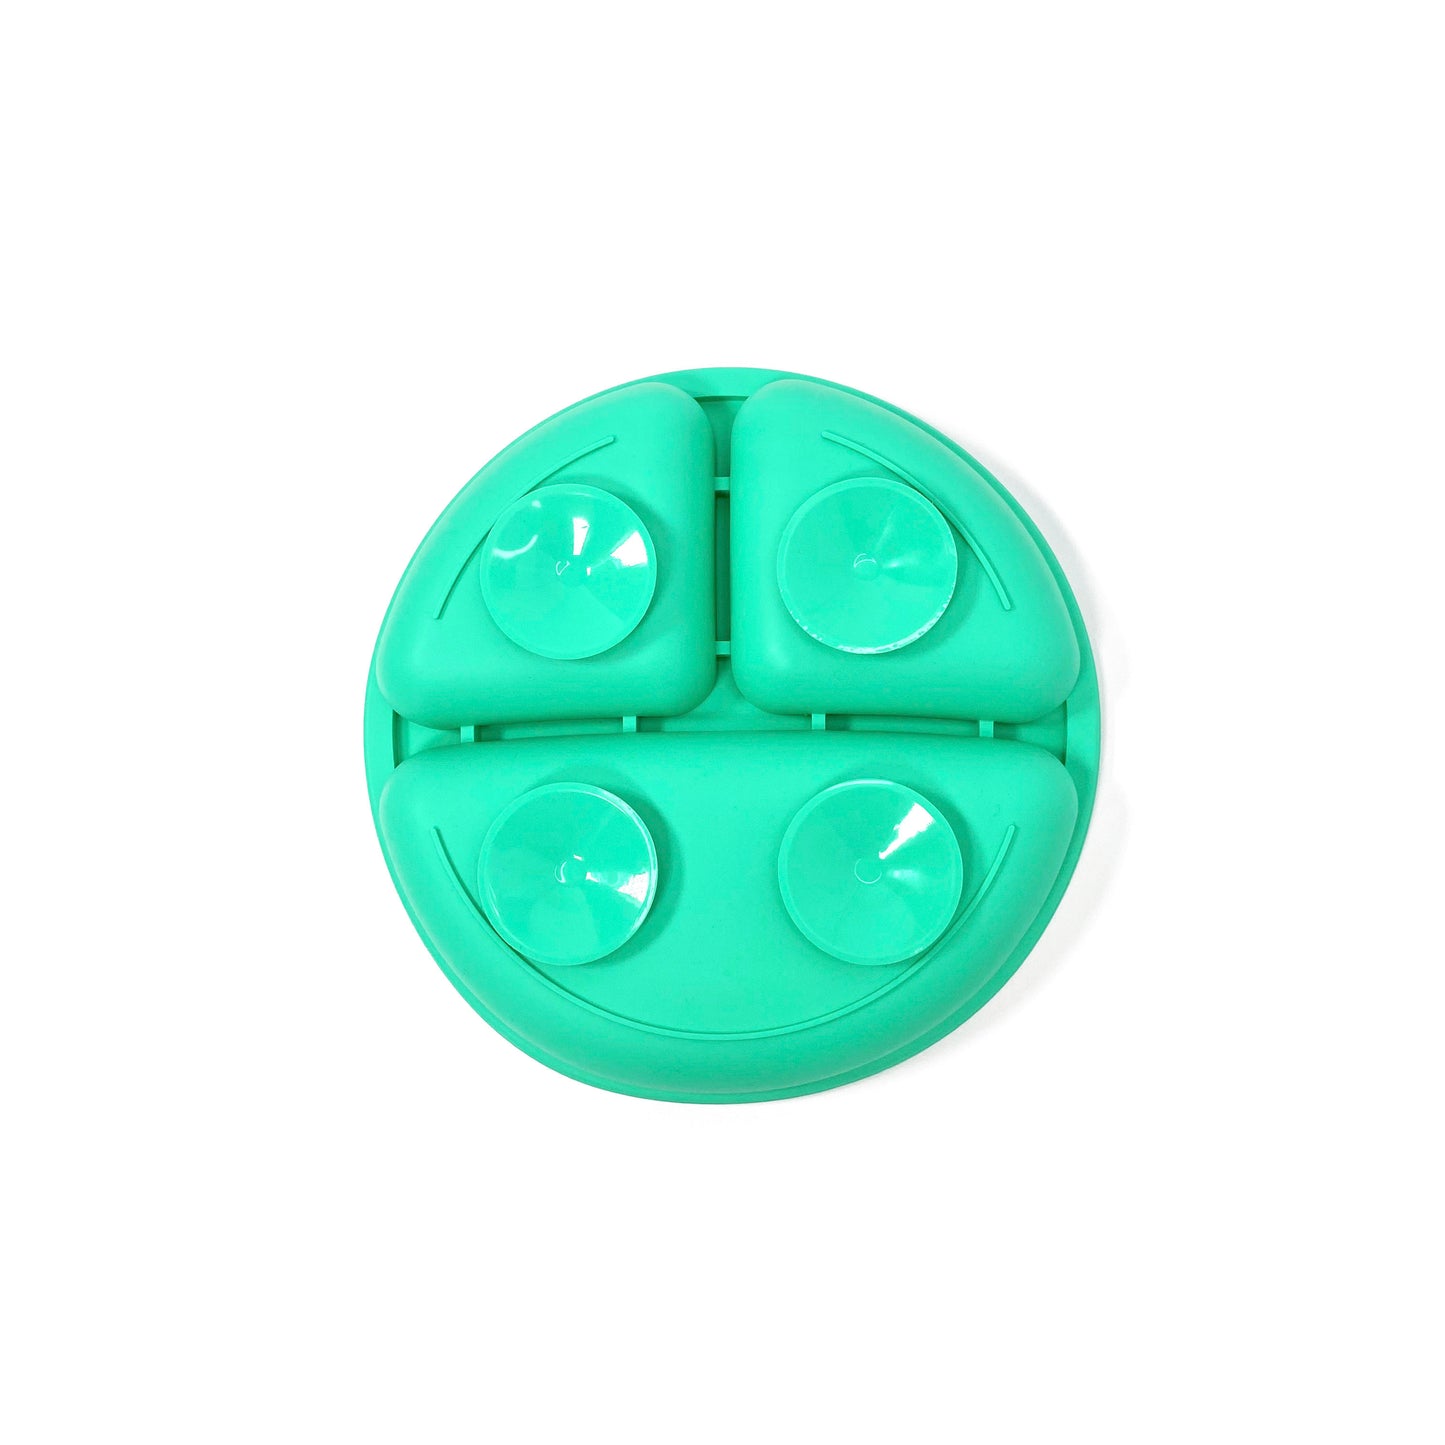 A seafoam green silicone children’s section plate with suction cups on the base. View shows the underside of the plate.